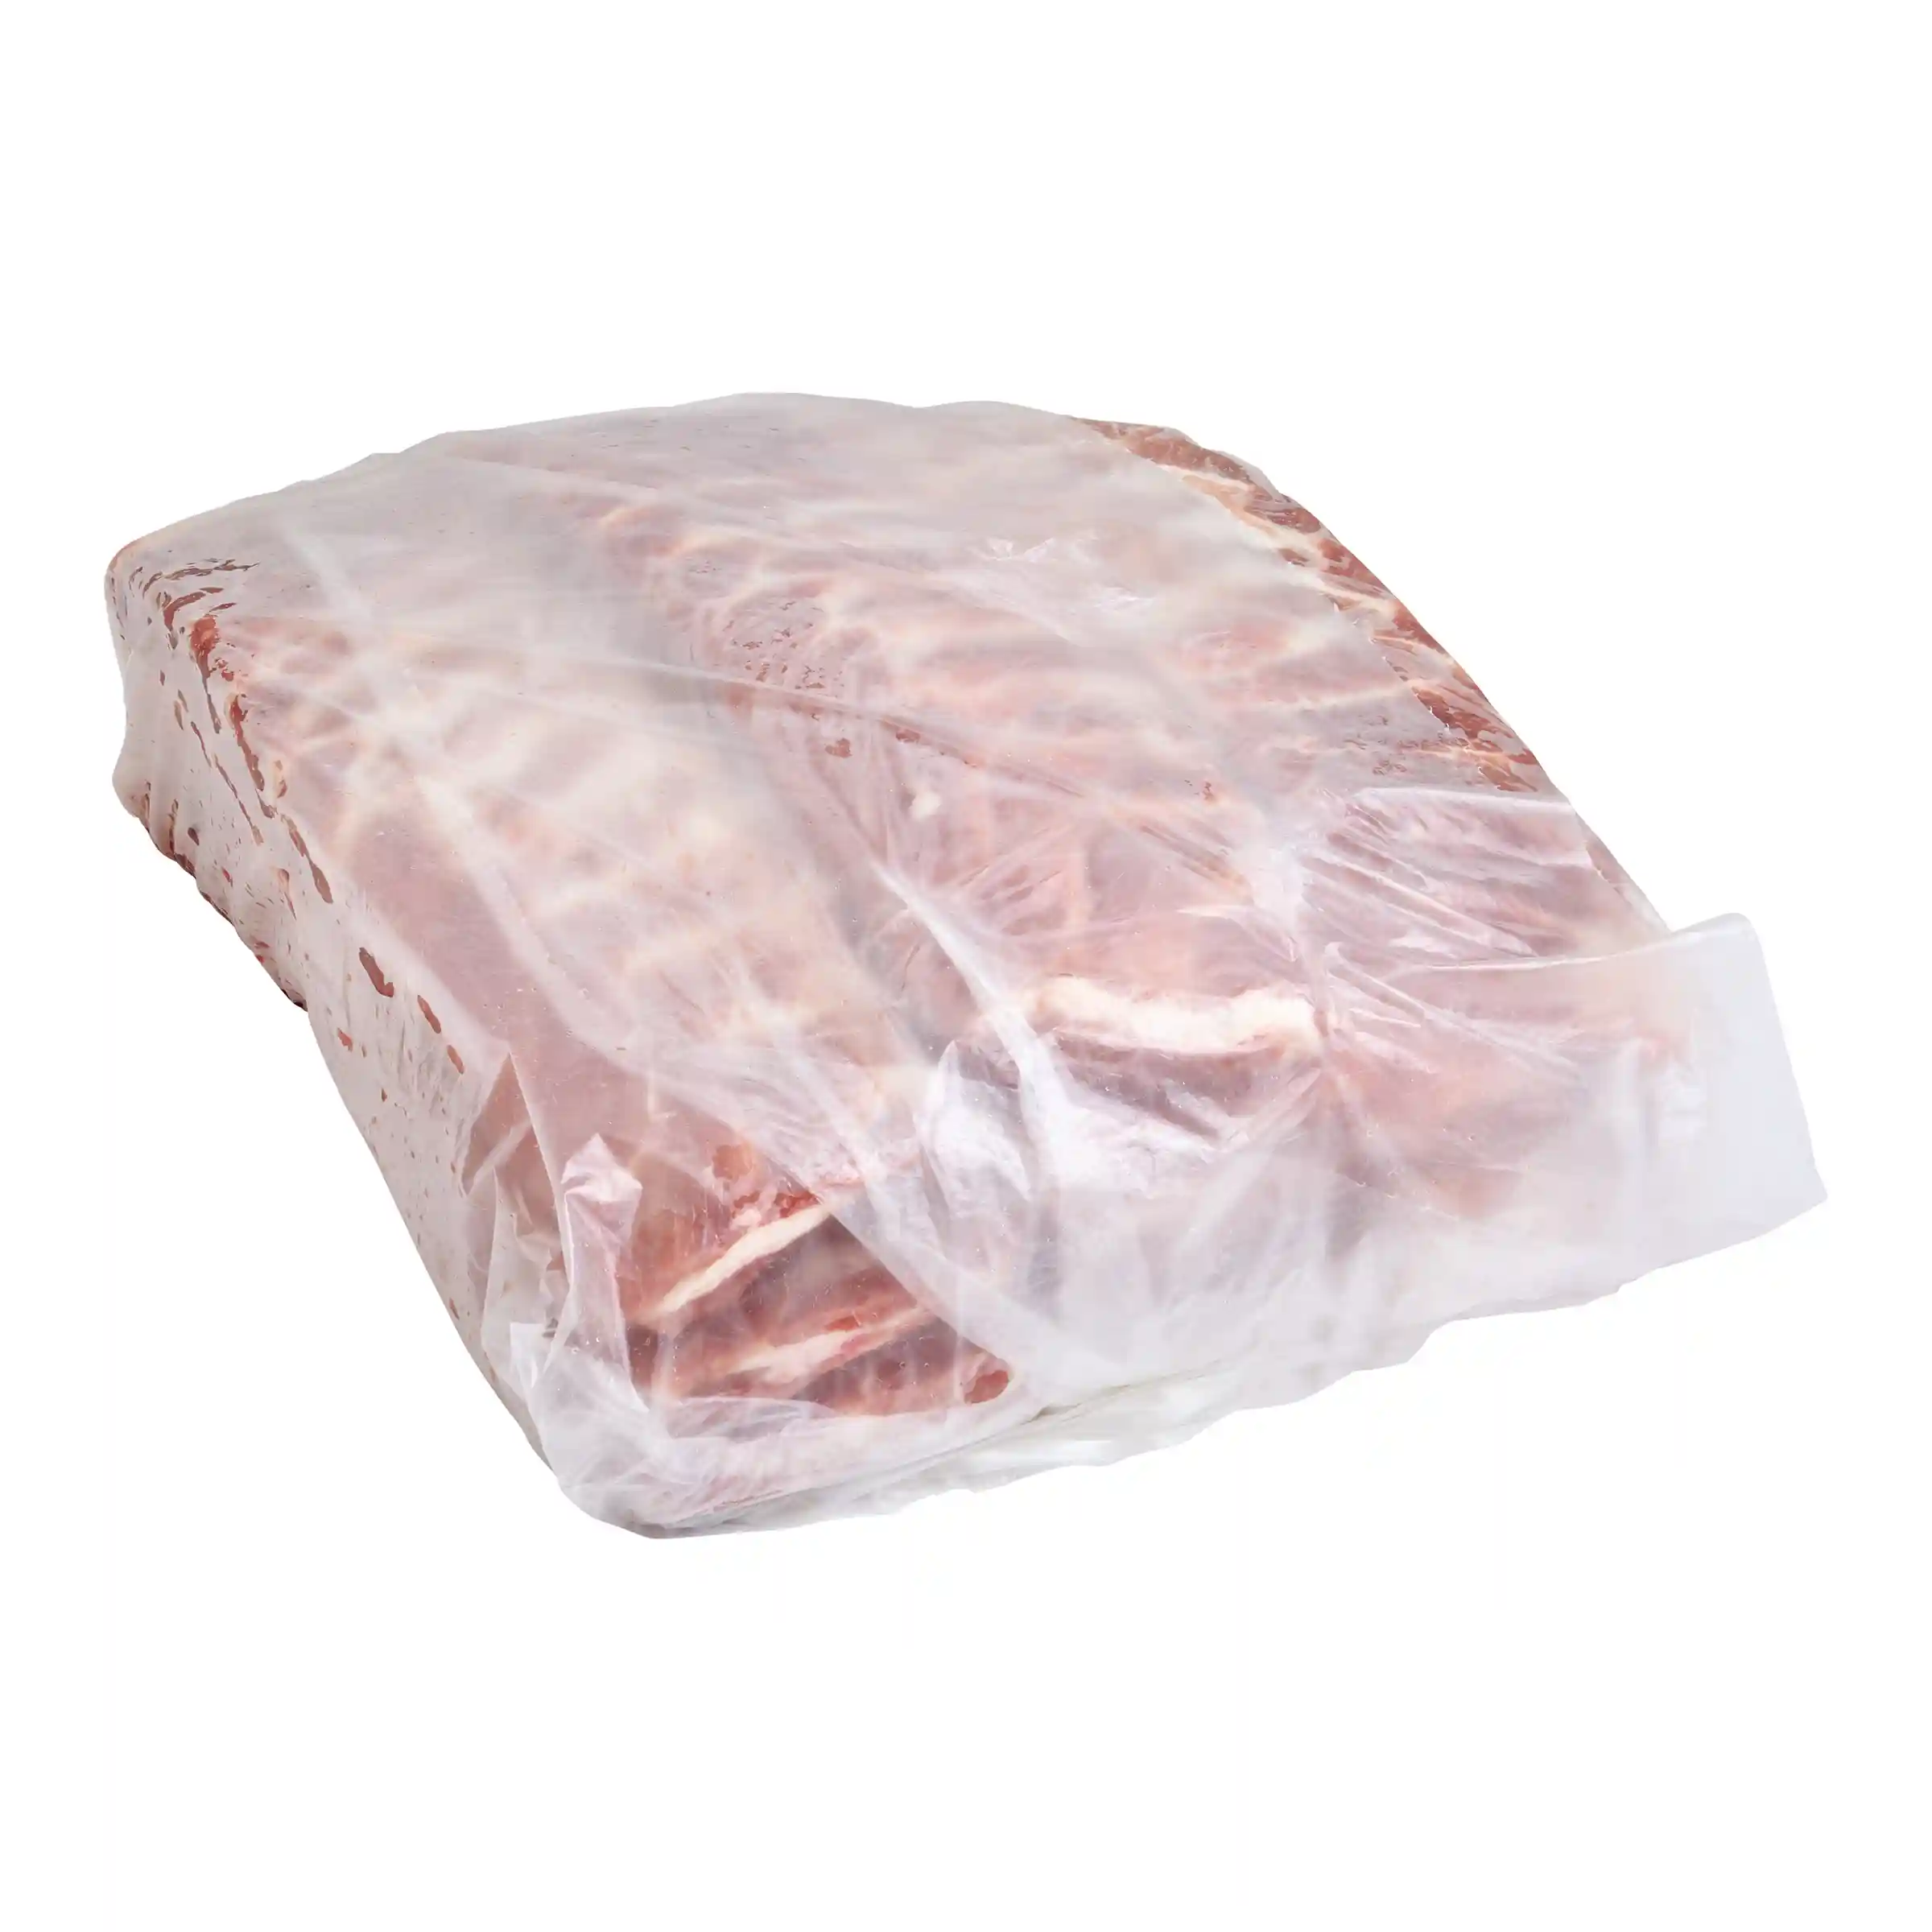 ibp Trusted Excellence® Brand St. Louis Style Ribs, 2.01 – 2.25 lbs_image_21